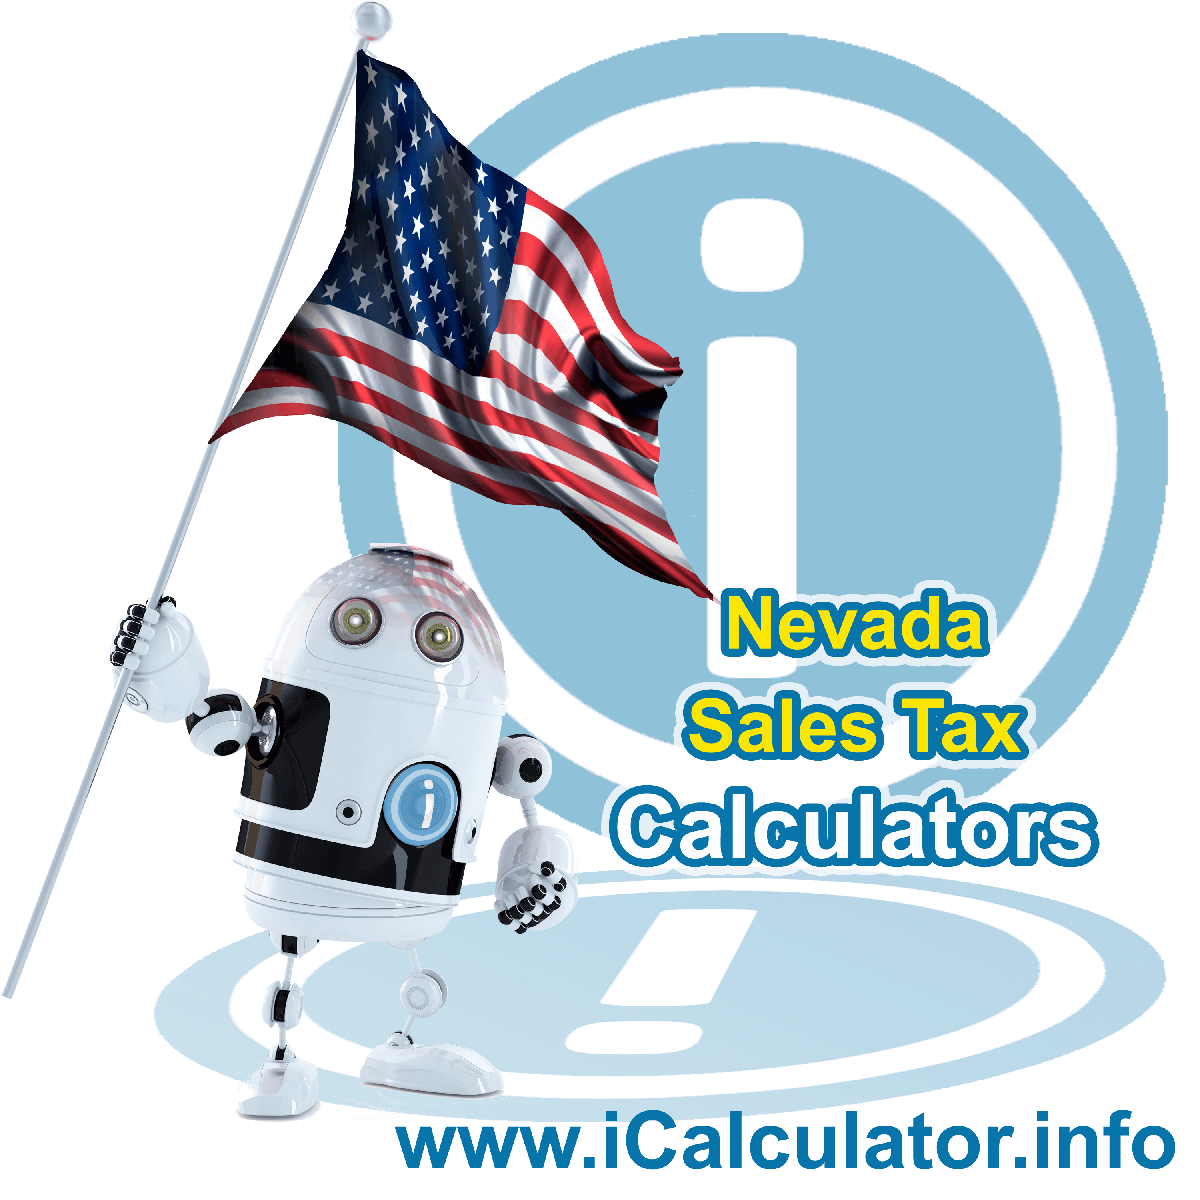 Lincoln County Sales Rates: This image illustrates a calculator robot calculating Lincoln County sales tax manually using the Lincoln County Sales Tax Formula. You can use this information to calculate Lincoln County Sales Tax manually or use the Lincoln County Sales Tax Calculator to calculate sales tax online.